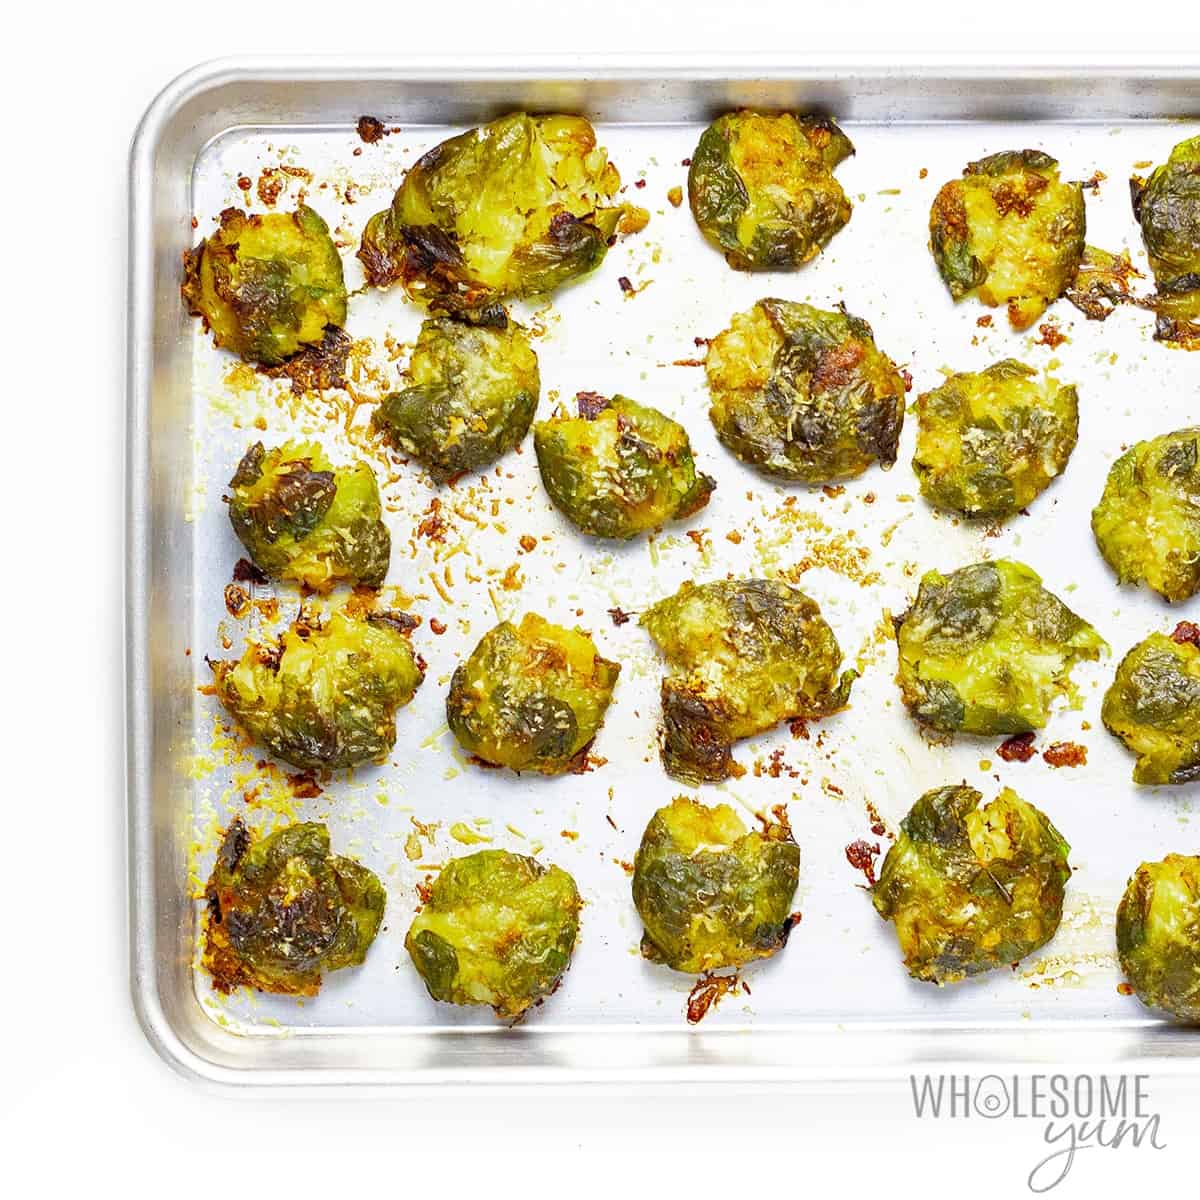 Roasted smashed brussels sprouts in baking pan